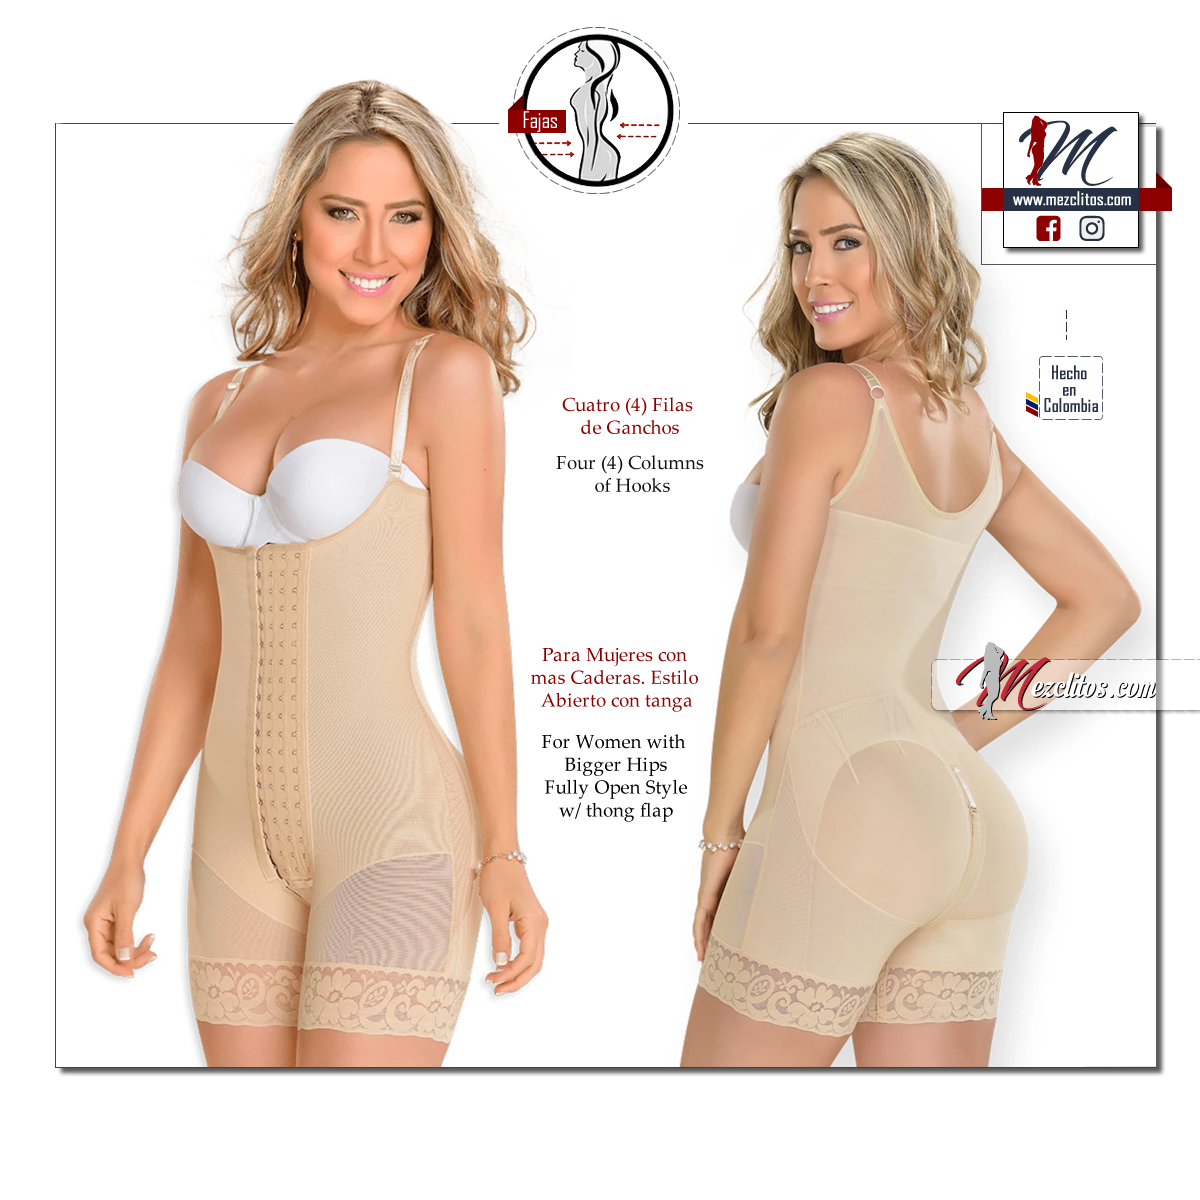 Fajas Colombianas 4 Front Fastening Options MYD Fajas Colombianas  Reductoras Post Surgical Body Shaper Girdles Ref 0085 (NUDE, XS) at   Women's Clothing store